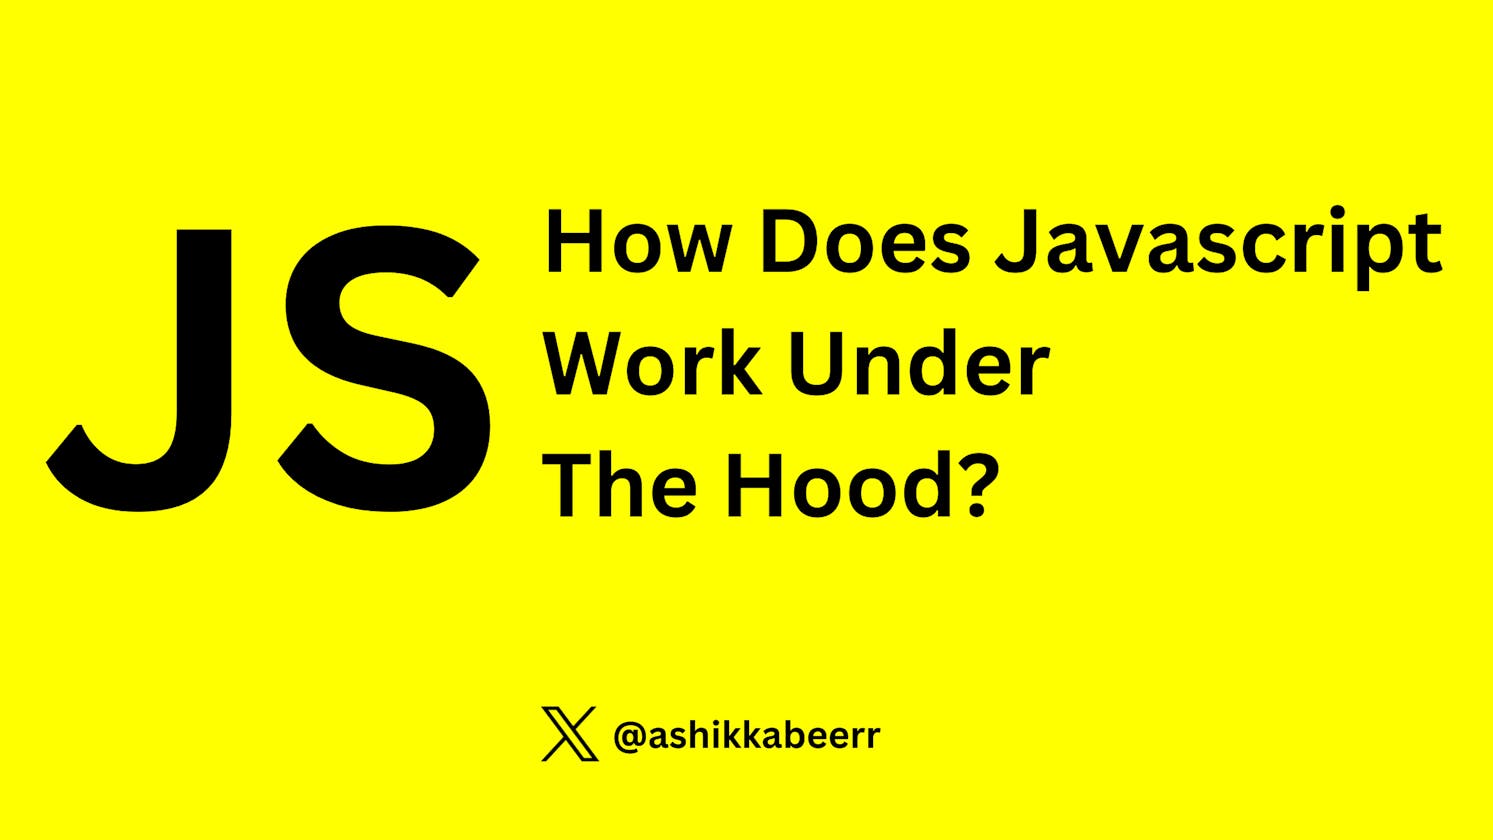 How Does Javascript Work Under The Hood?